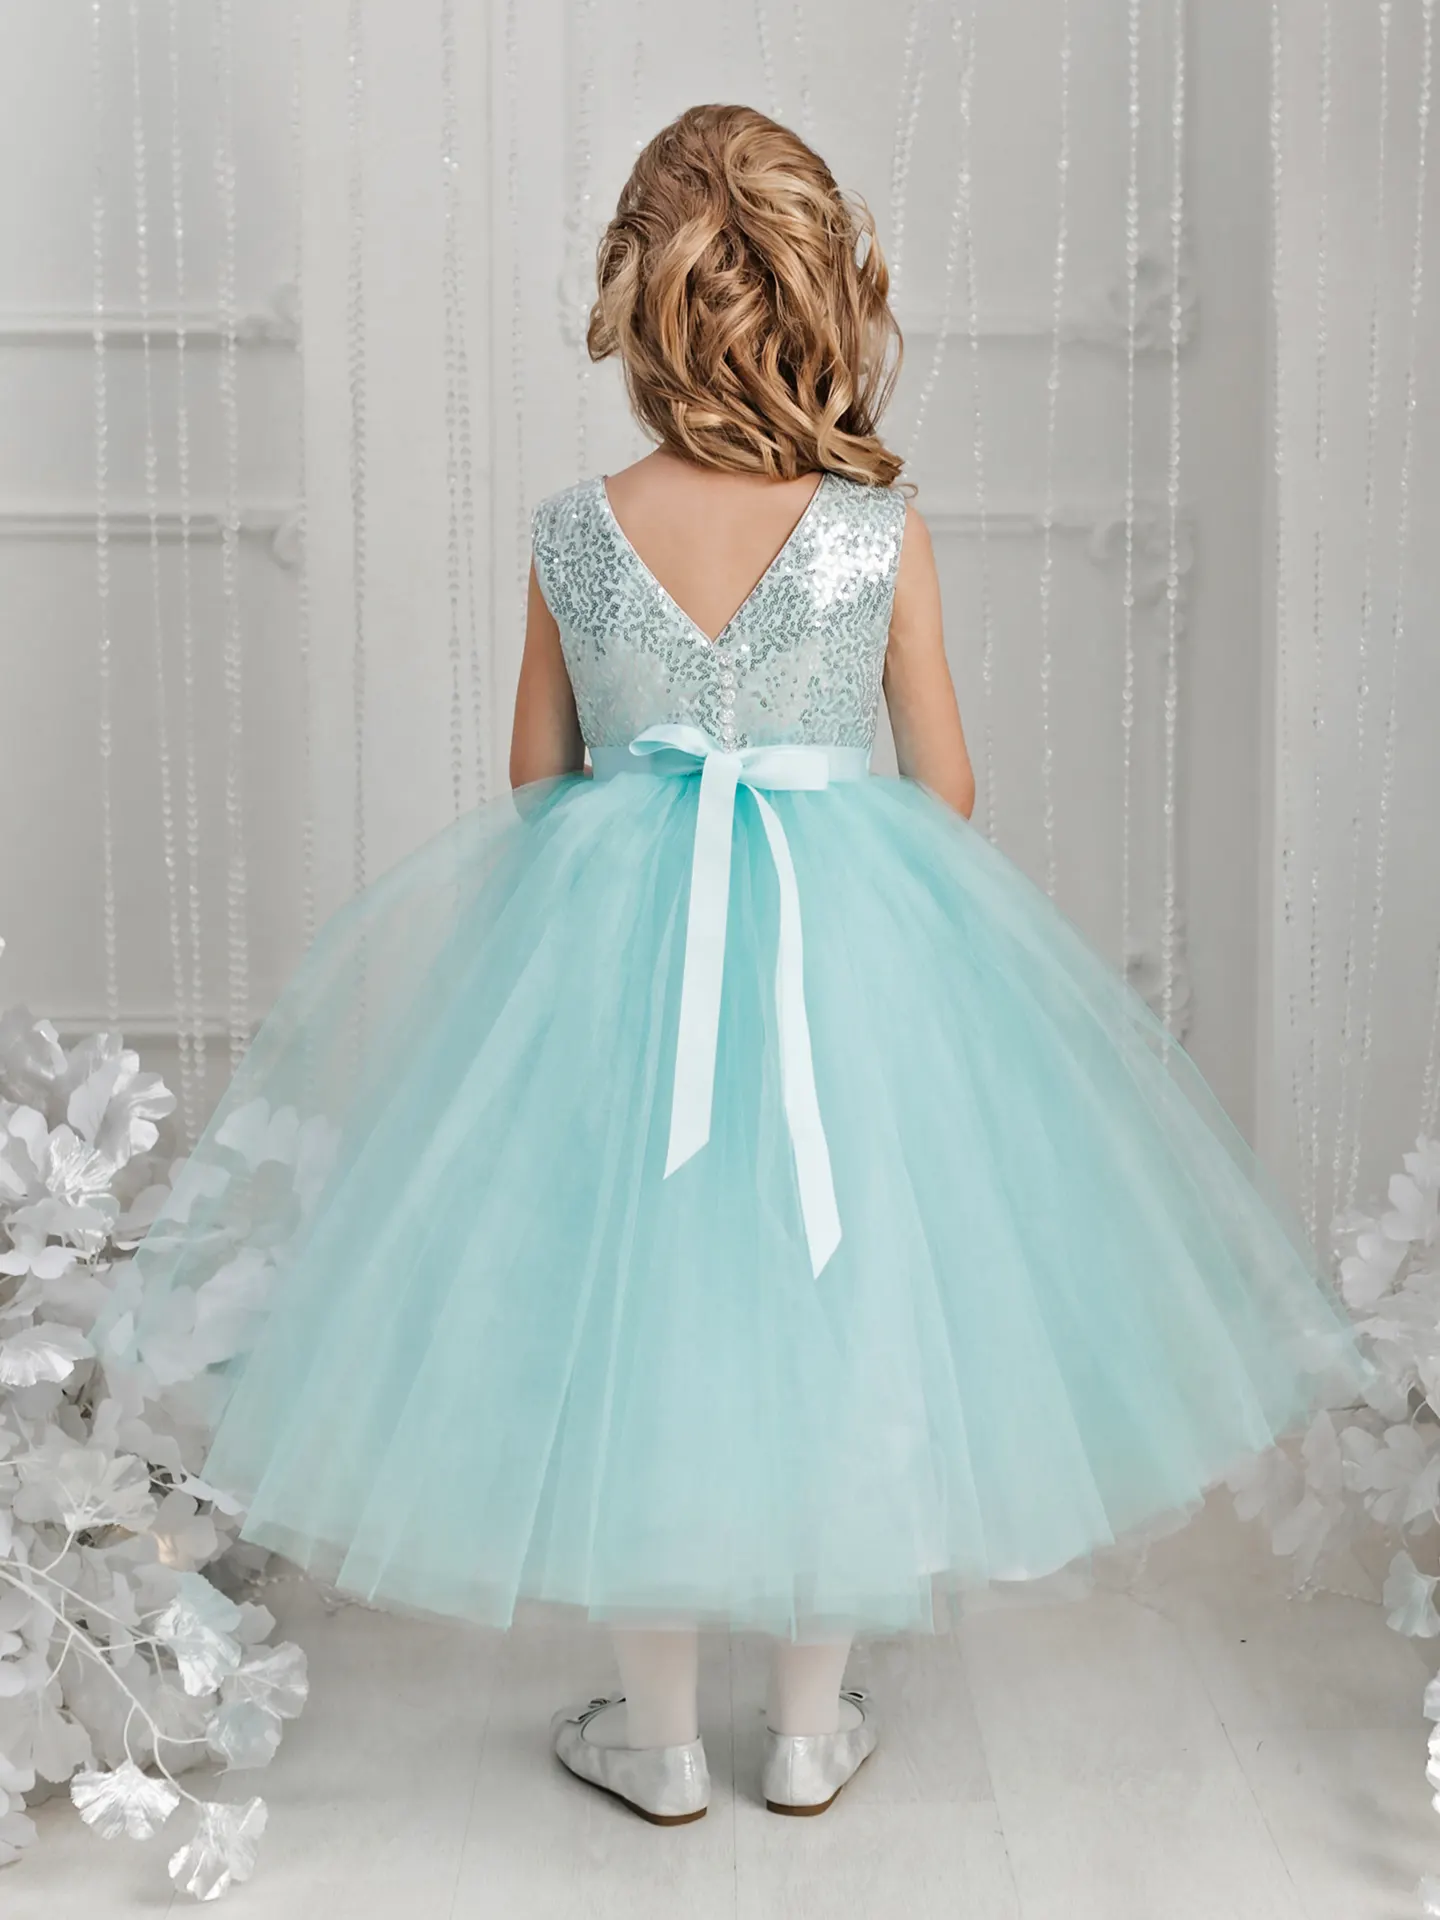 Party girl's dress with sequins and wide tulle skirt